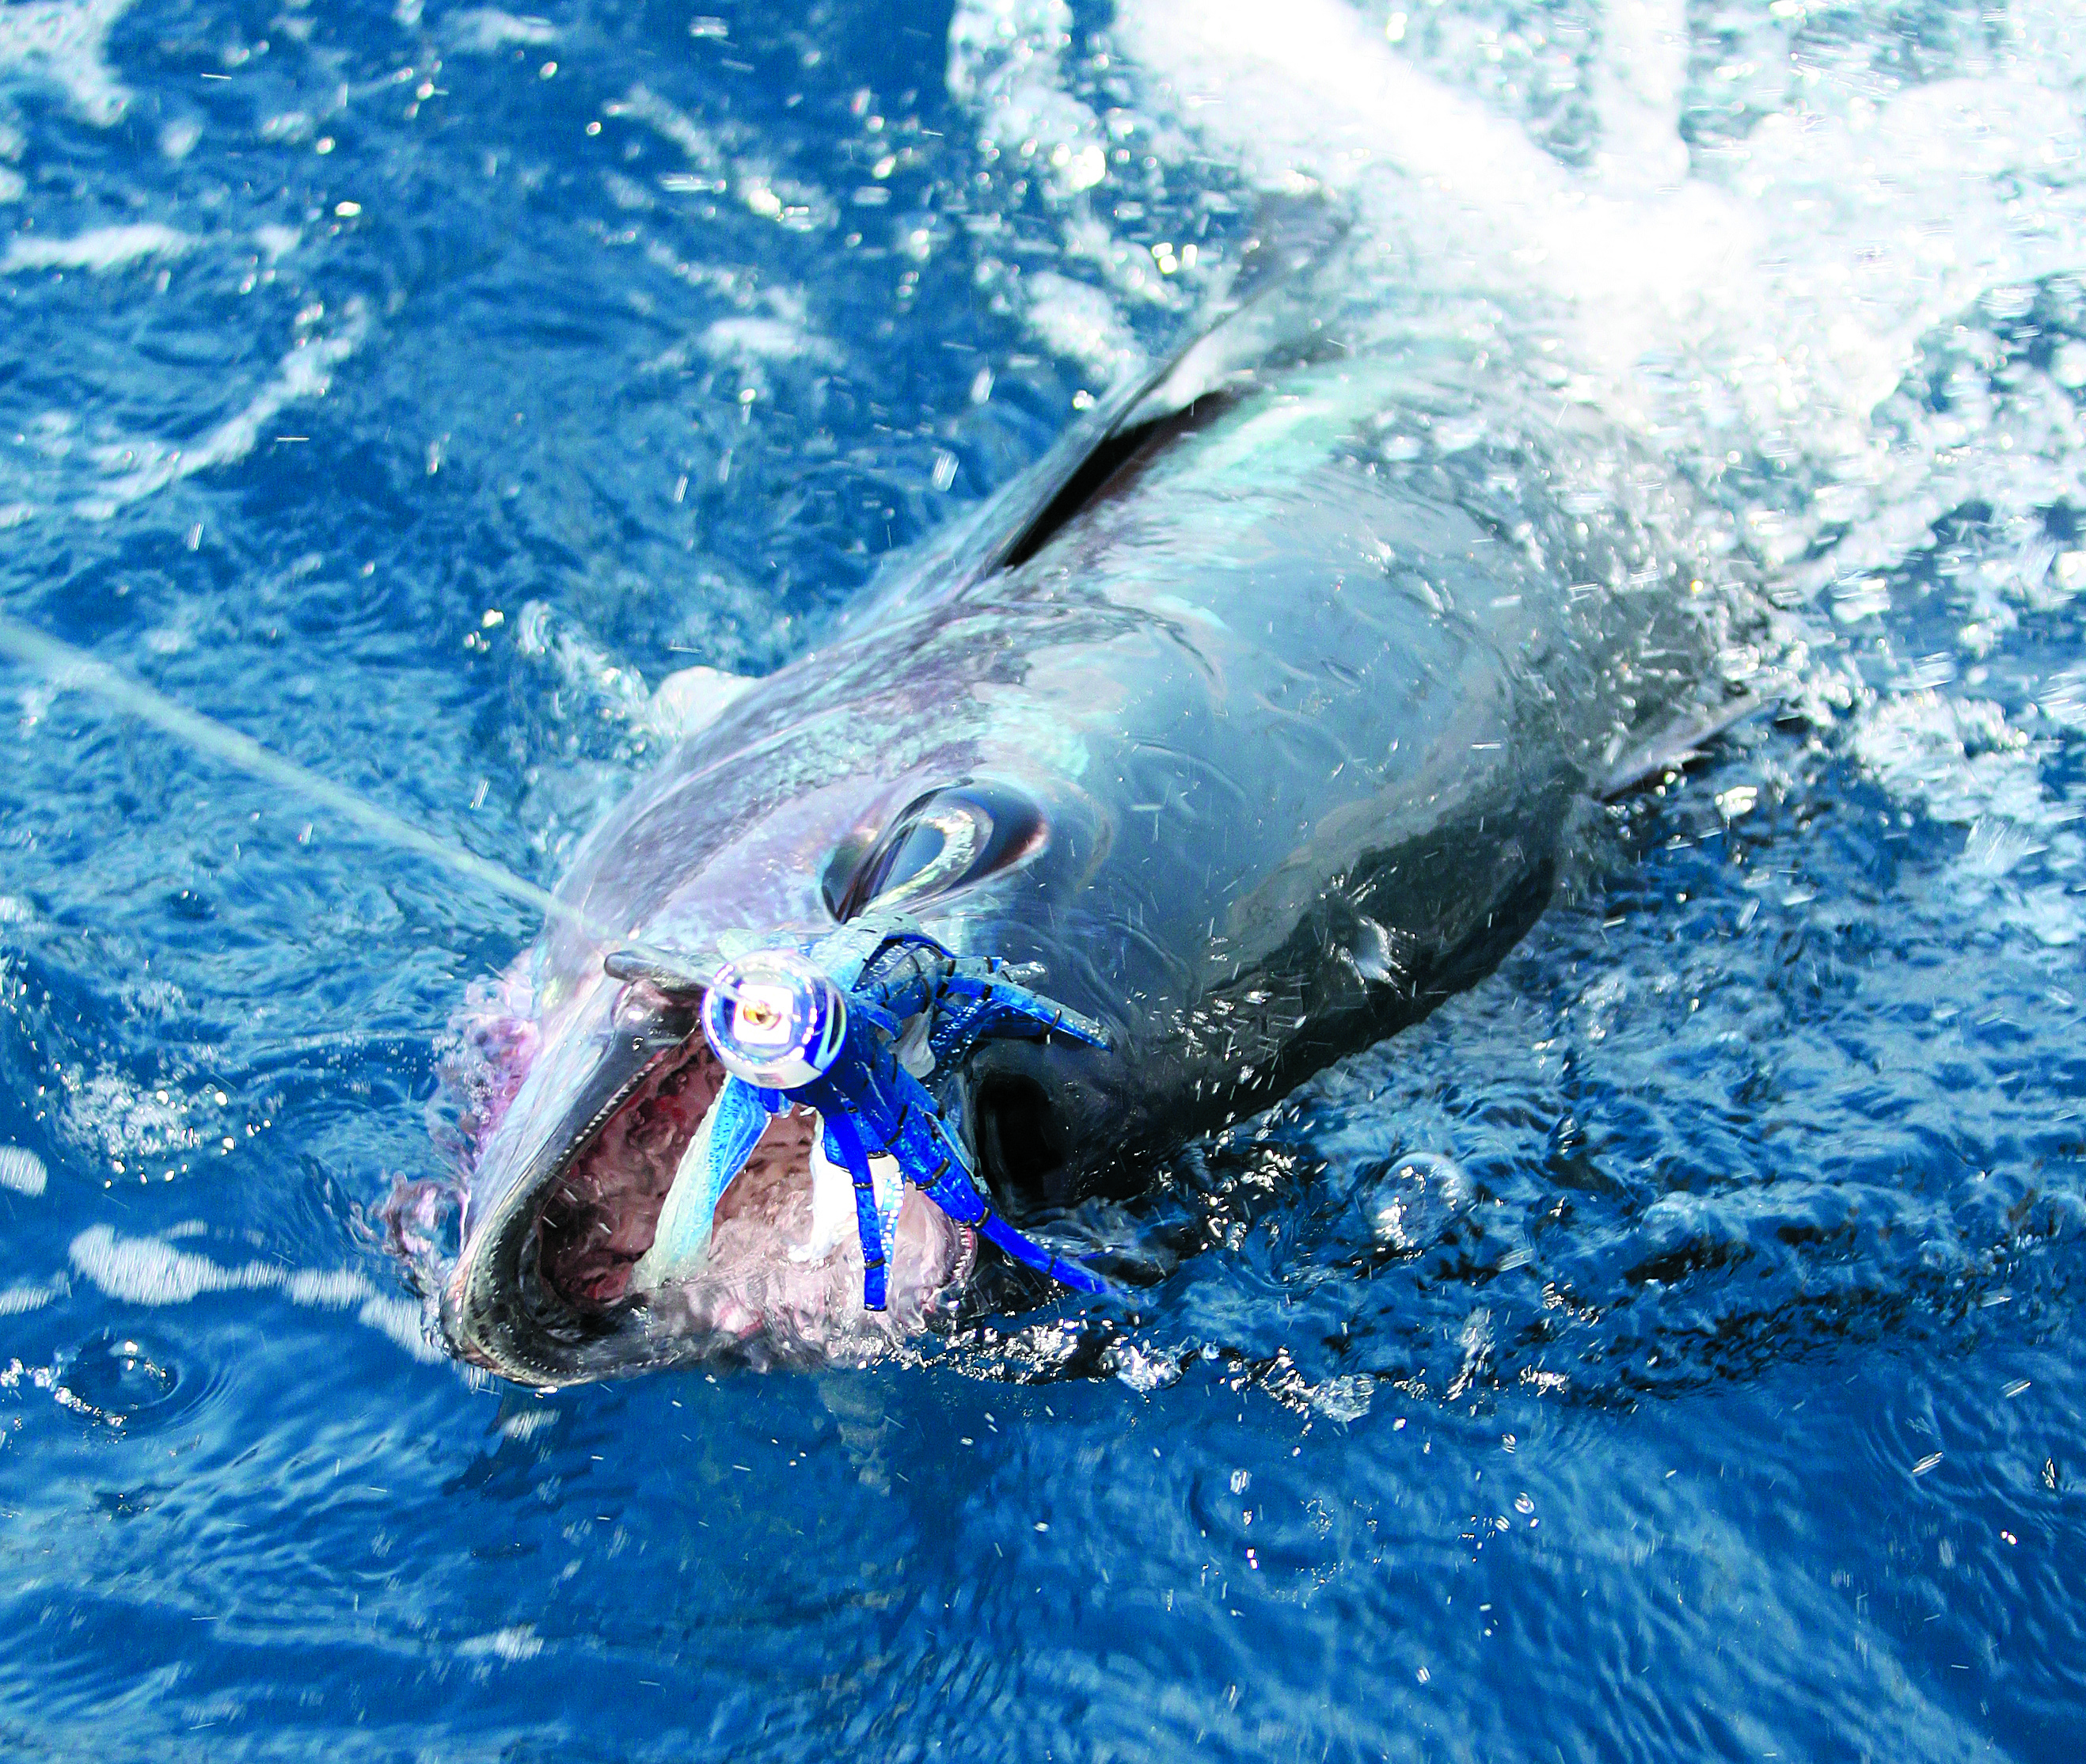 Our range of tuna lures has been nailing all kinds of tuna for